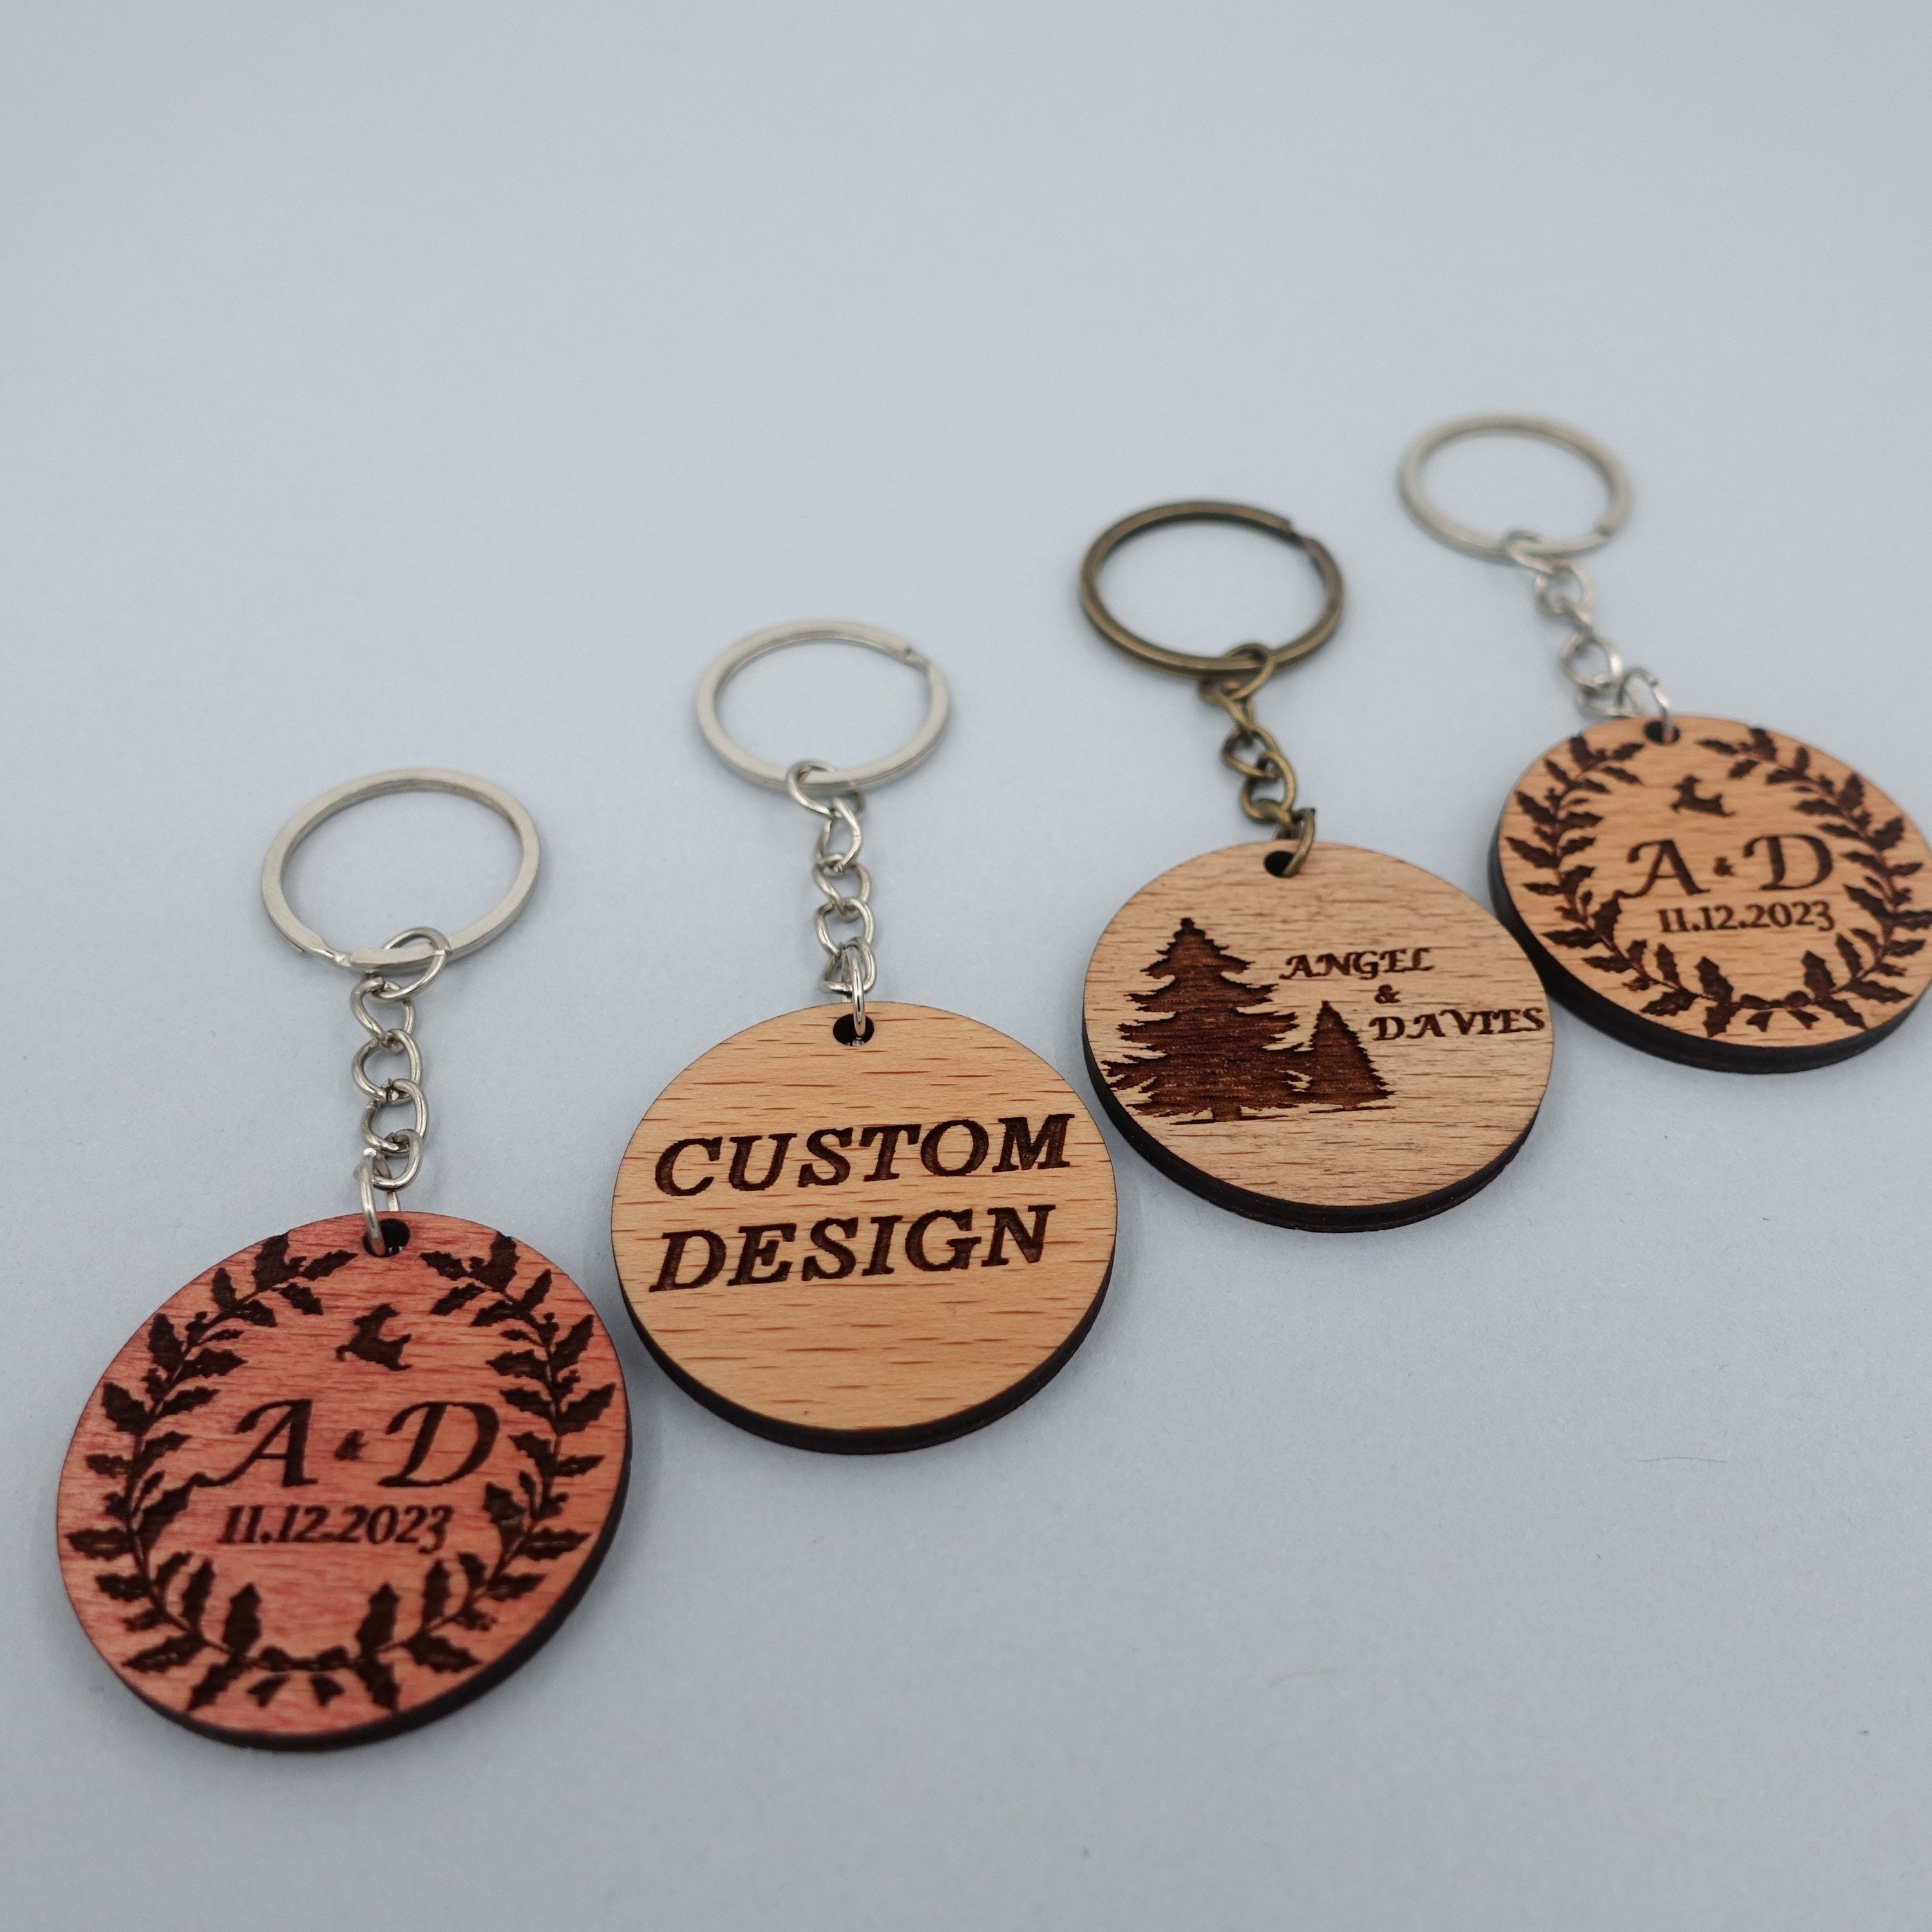 10pcs Personalized Engrave Round Wooden Keychain With Tassels Wood Keyring  Tags Christening Baptism Frist Holy Communion Gift - AliExpress